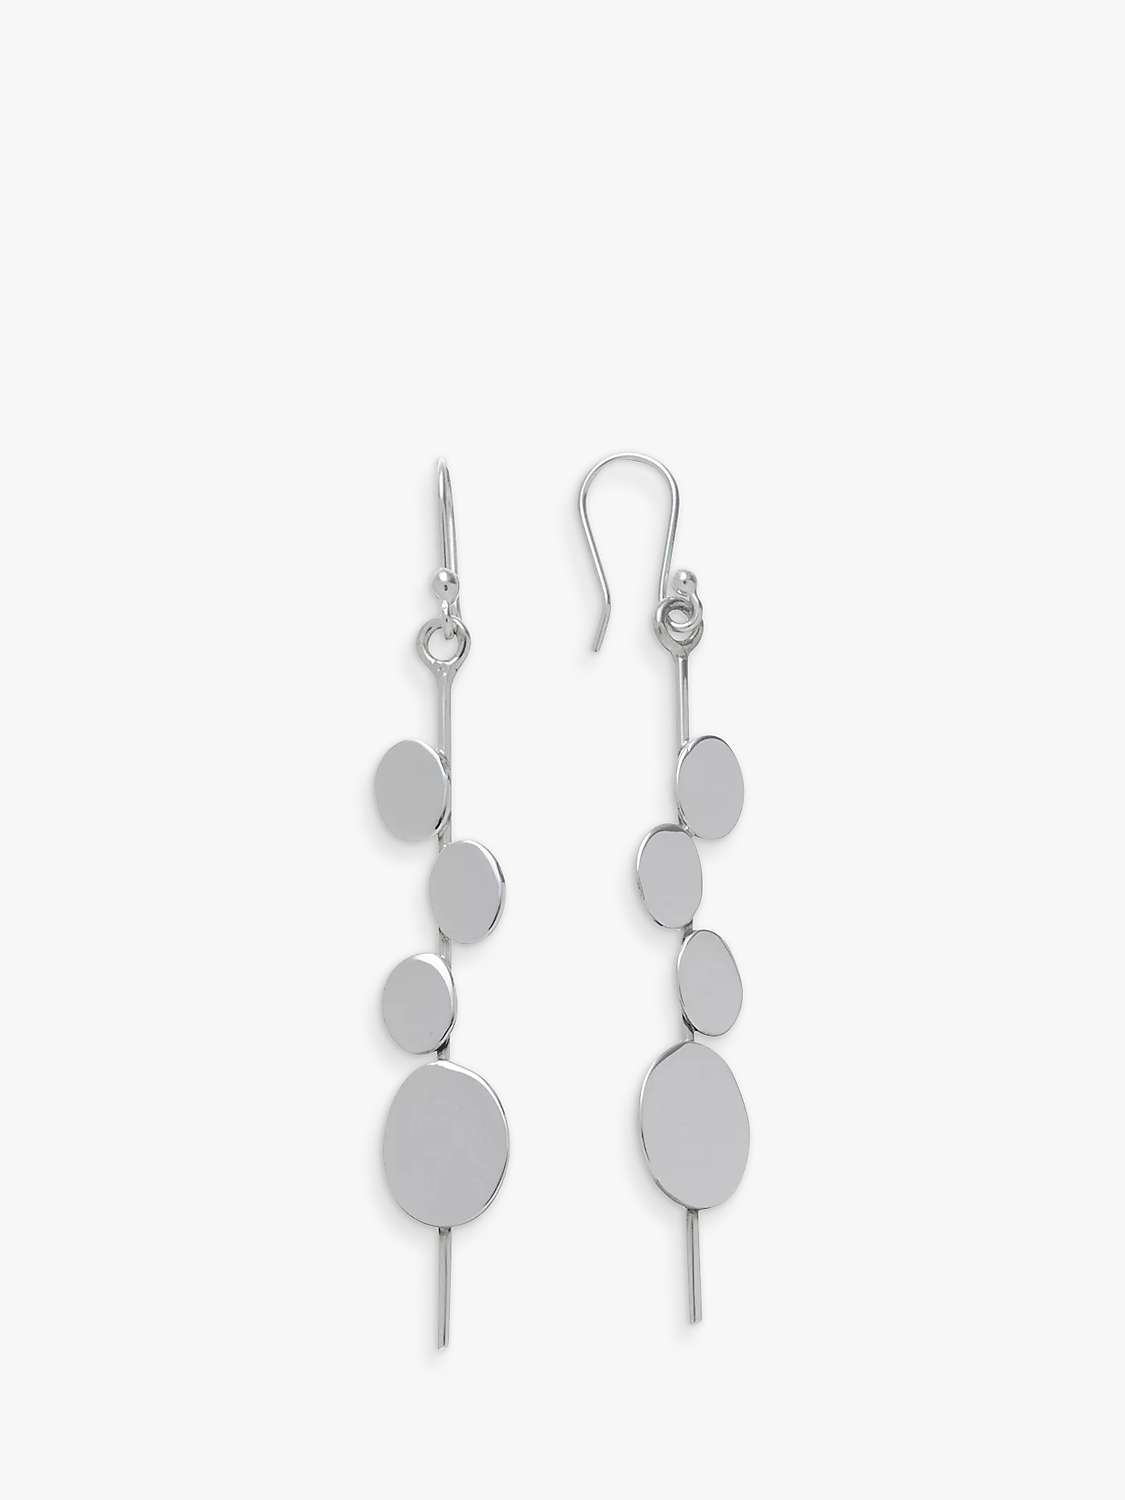 Buy Andea Sterling Silver Art Deco Disc Earrings Online at johnlewis.com